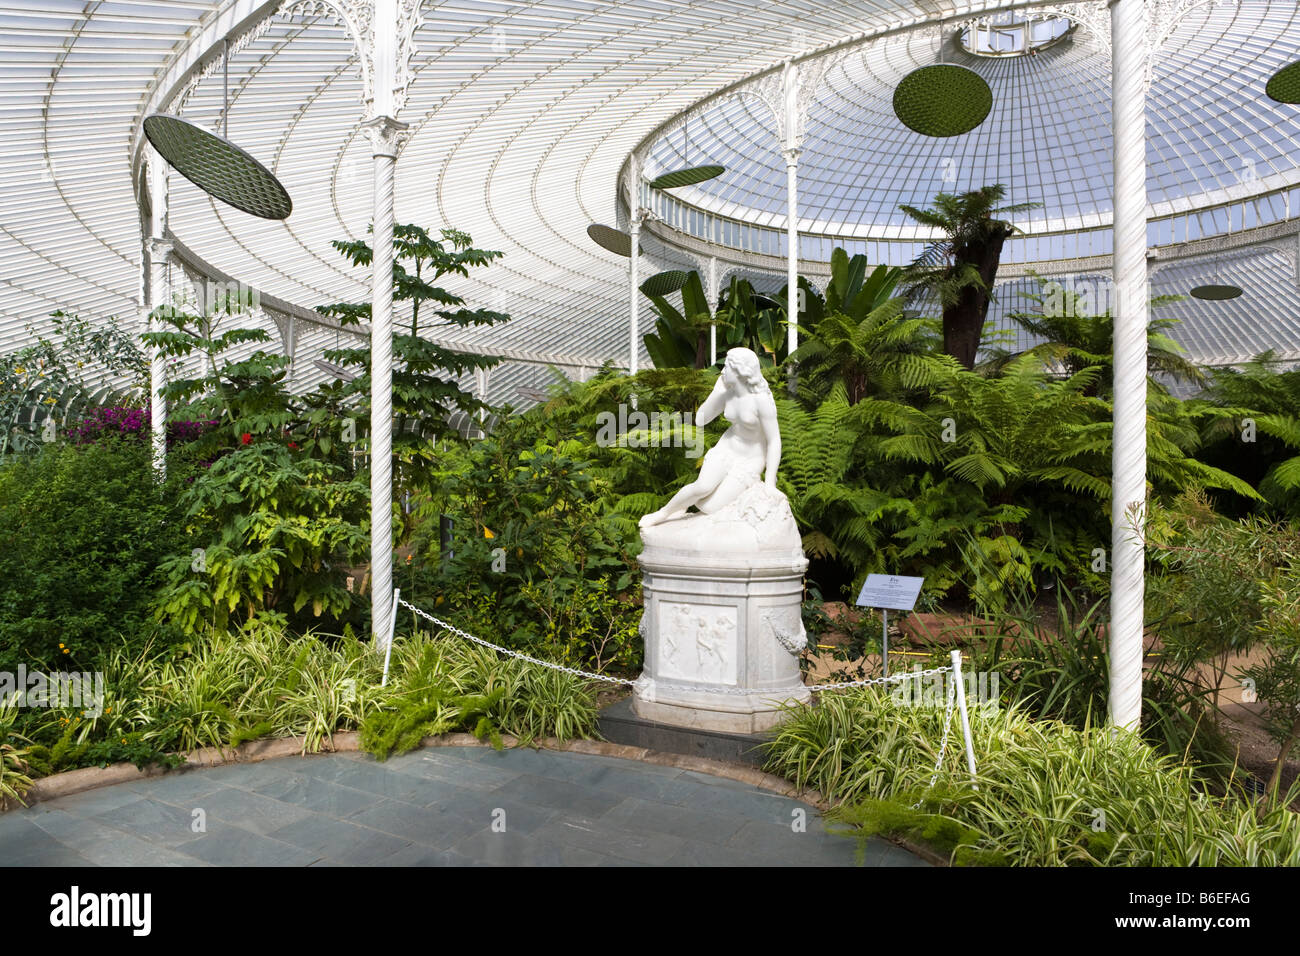 The marble statue of Eve in the restored Kibble Palace glasshouse in Glasgow Botanic Gardens, Glasgow, Scotland UK Stock Photo